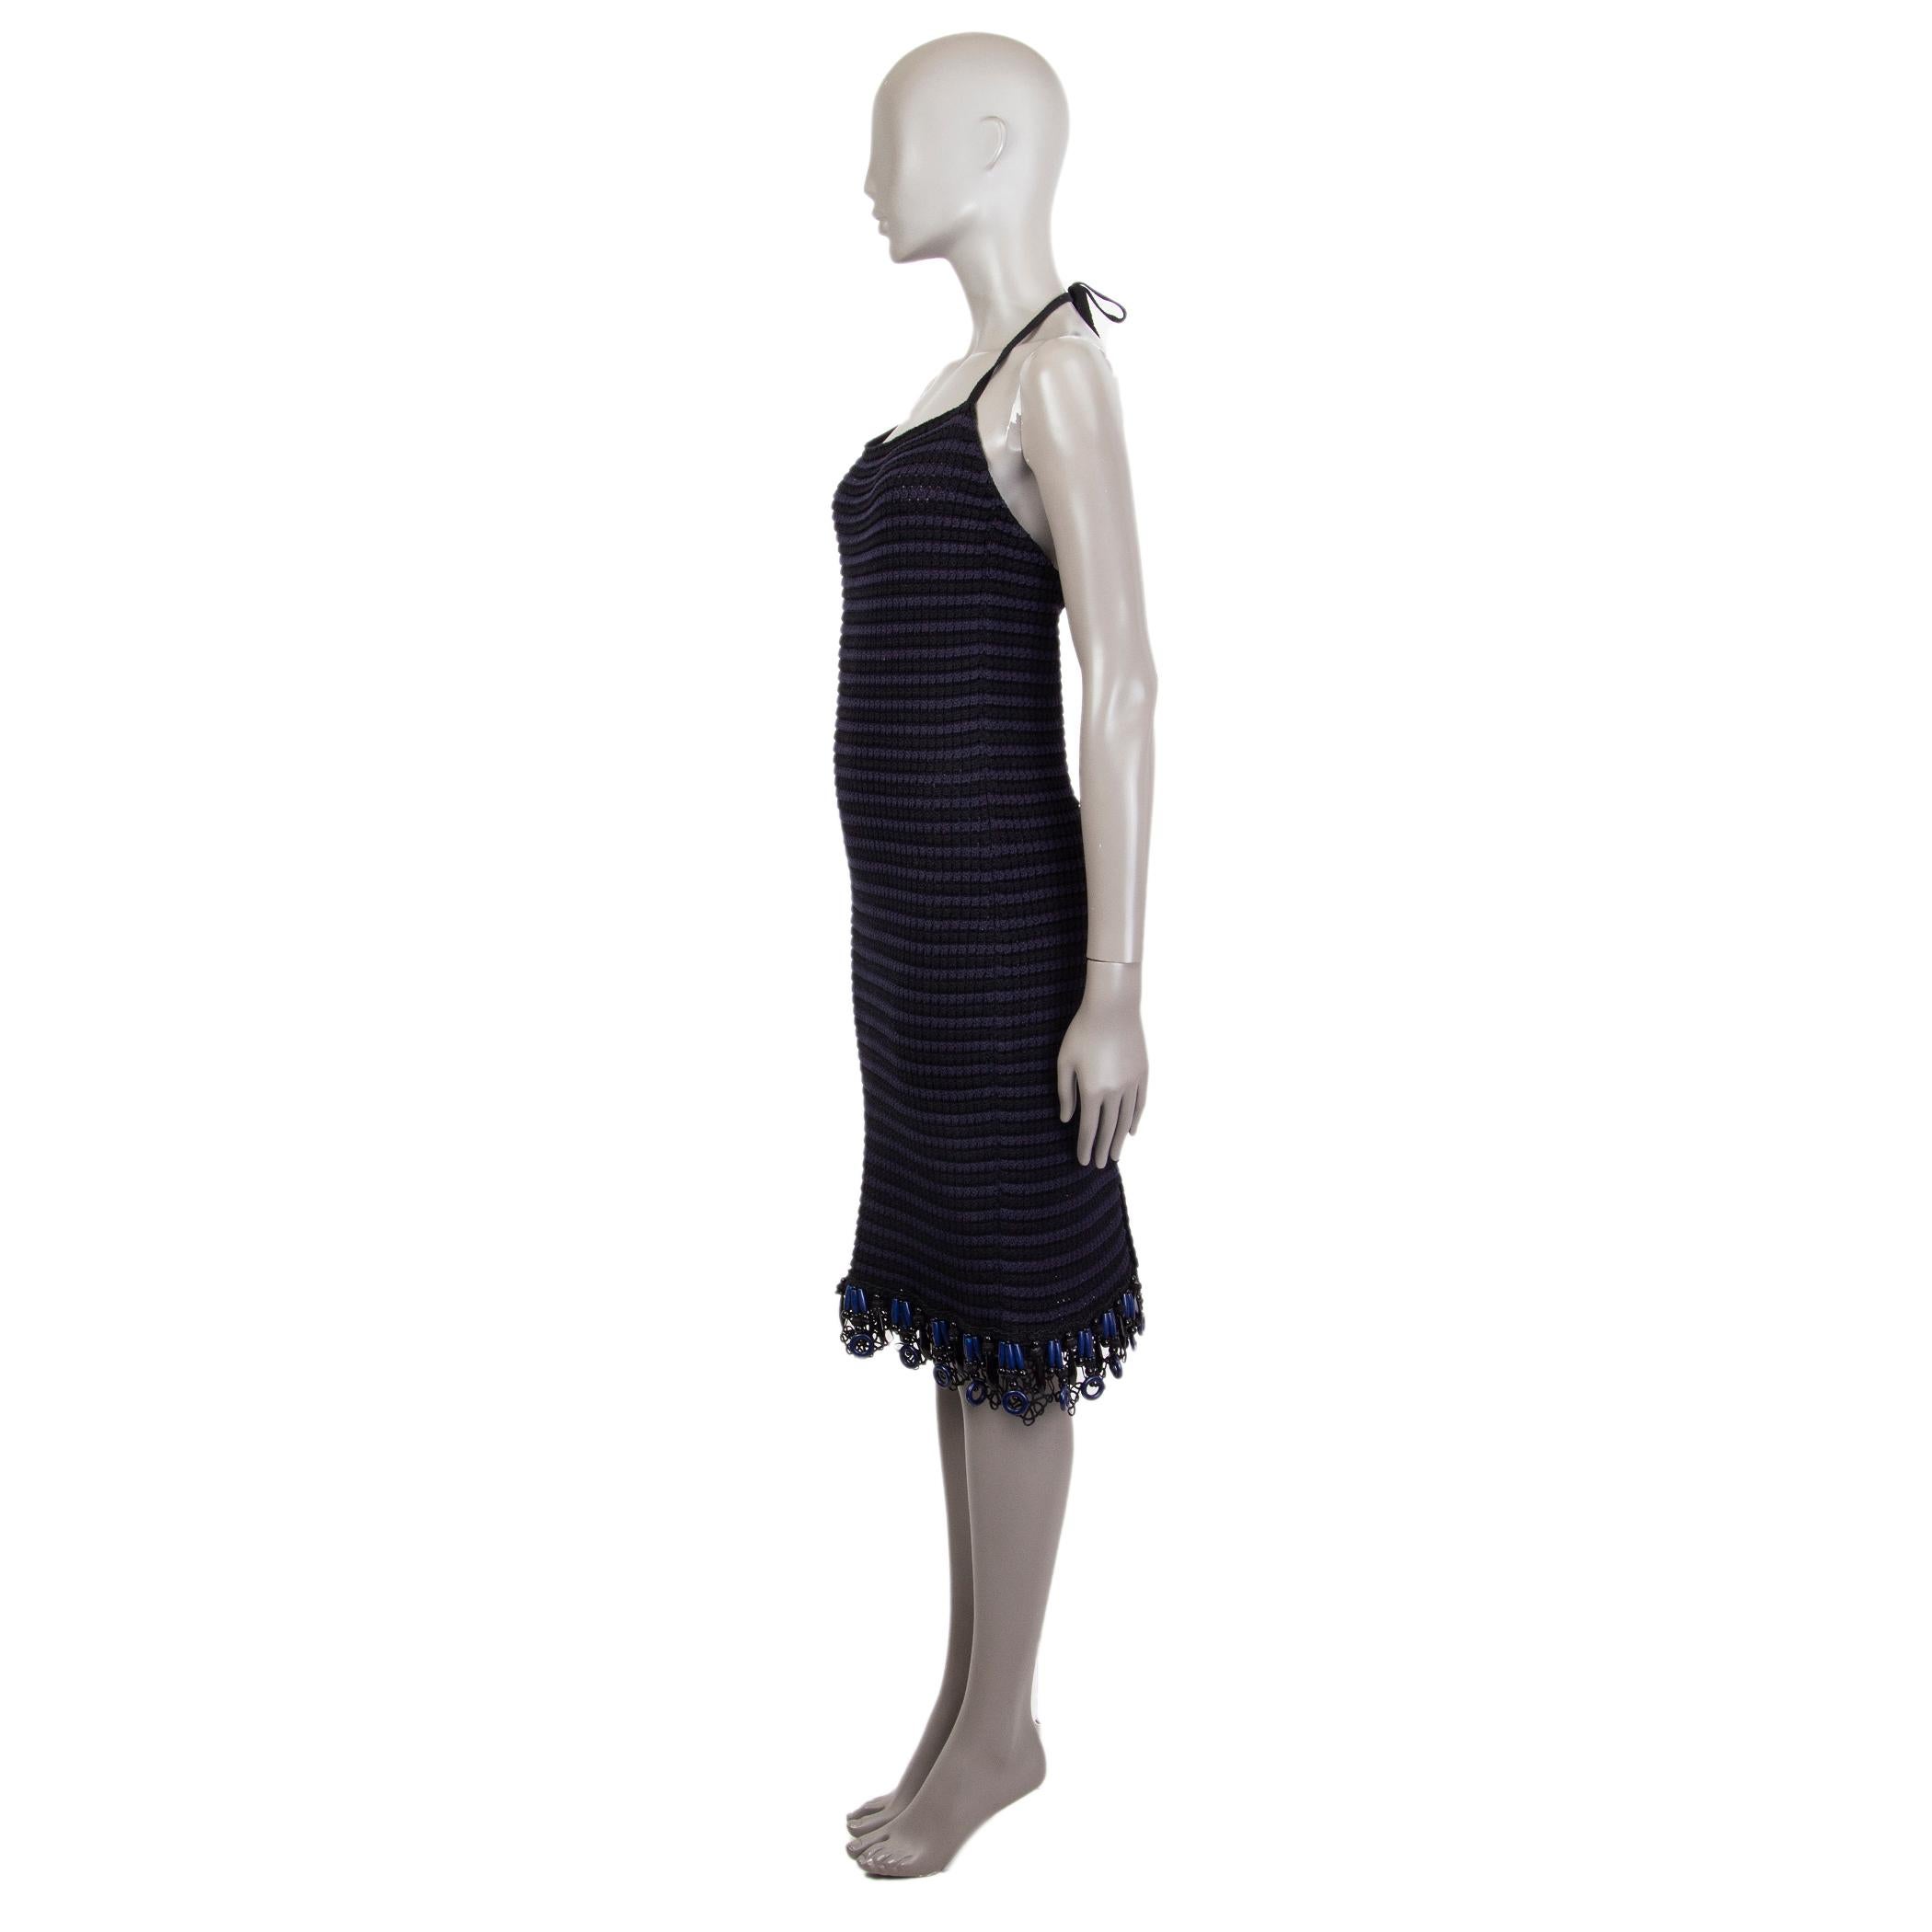 Prada crochet dress in midnight blue and black cotton (100%) with a neck holder, straight fit and laced hemline detailed with ornaments. Fabric comes in a knitted look. Unlined. Has been worn and is in excellent condition.

Tag Size 40
Size S
Bust